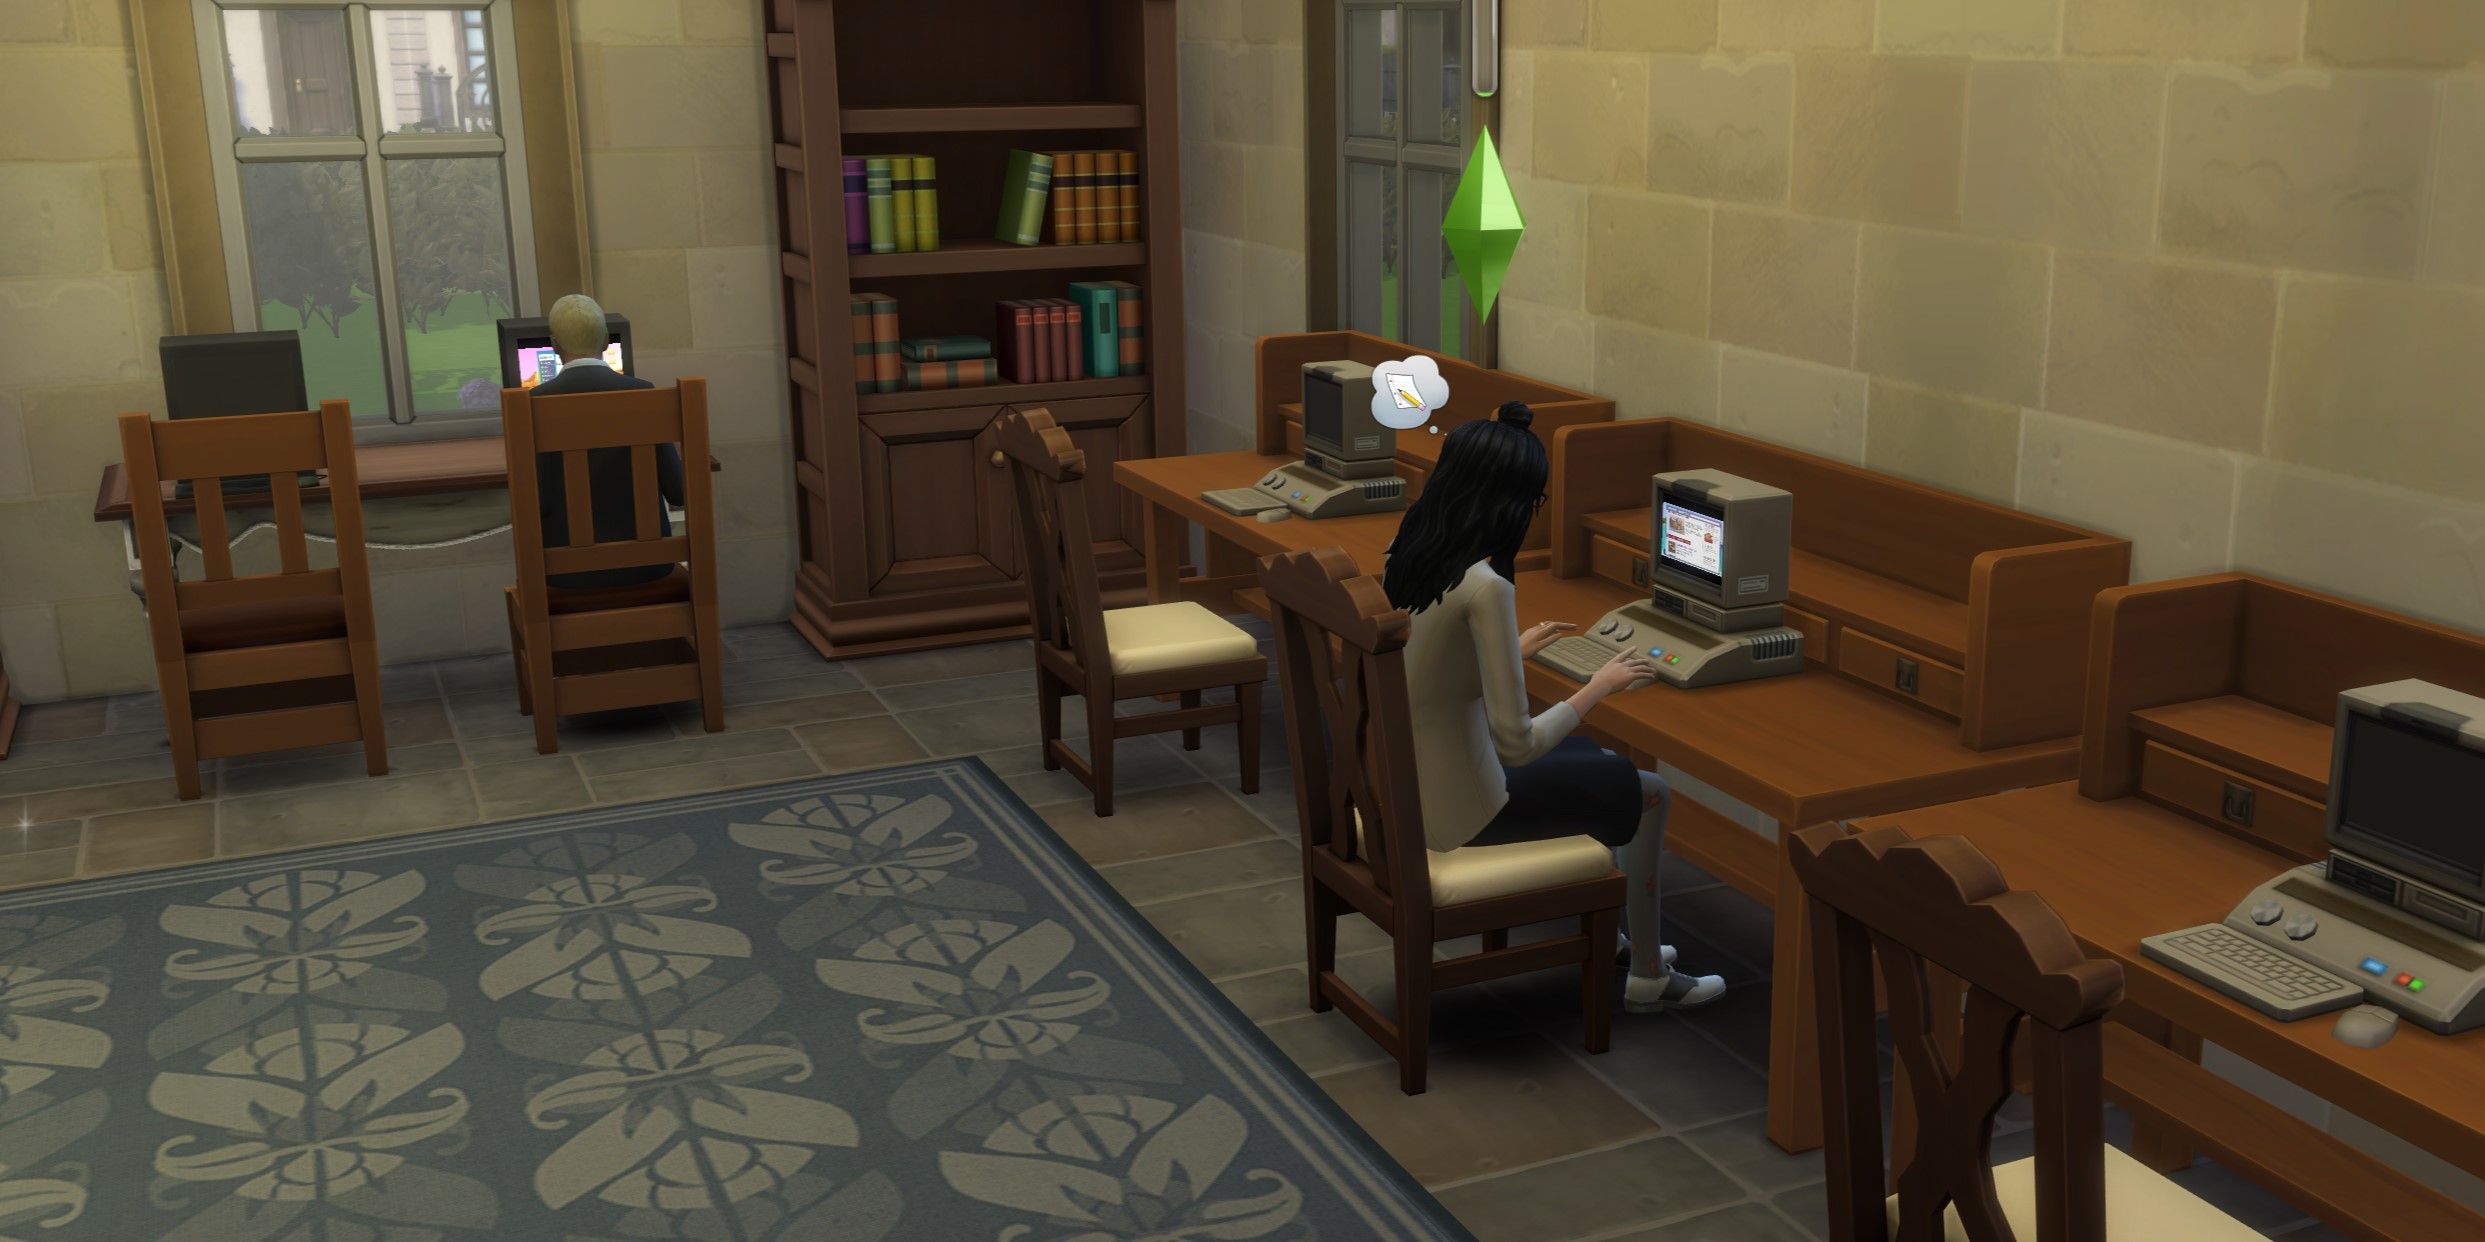 The Sims 4: An image of a Sim studying at a Research Computer